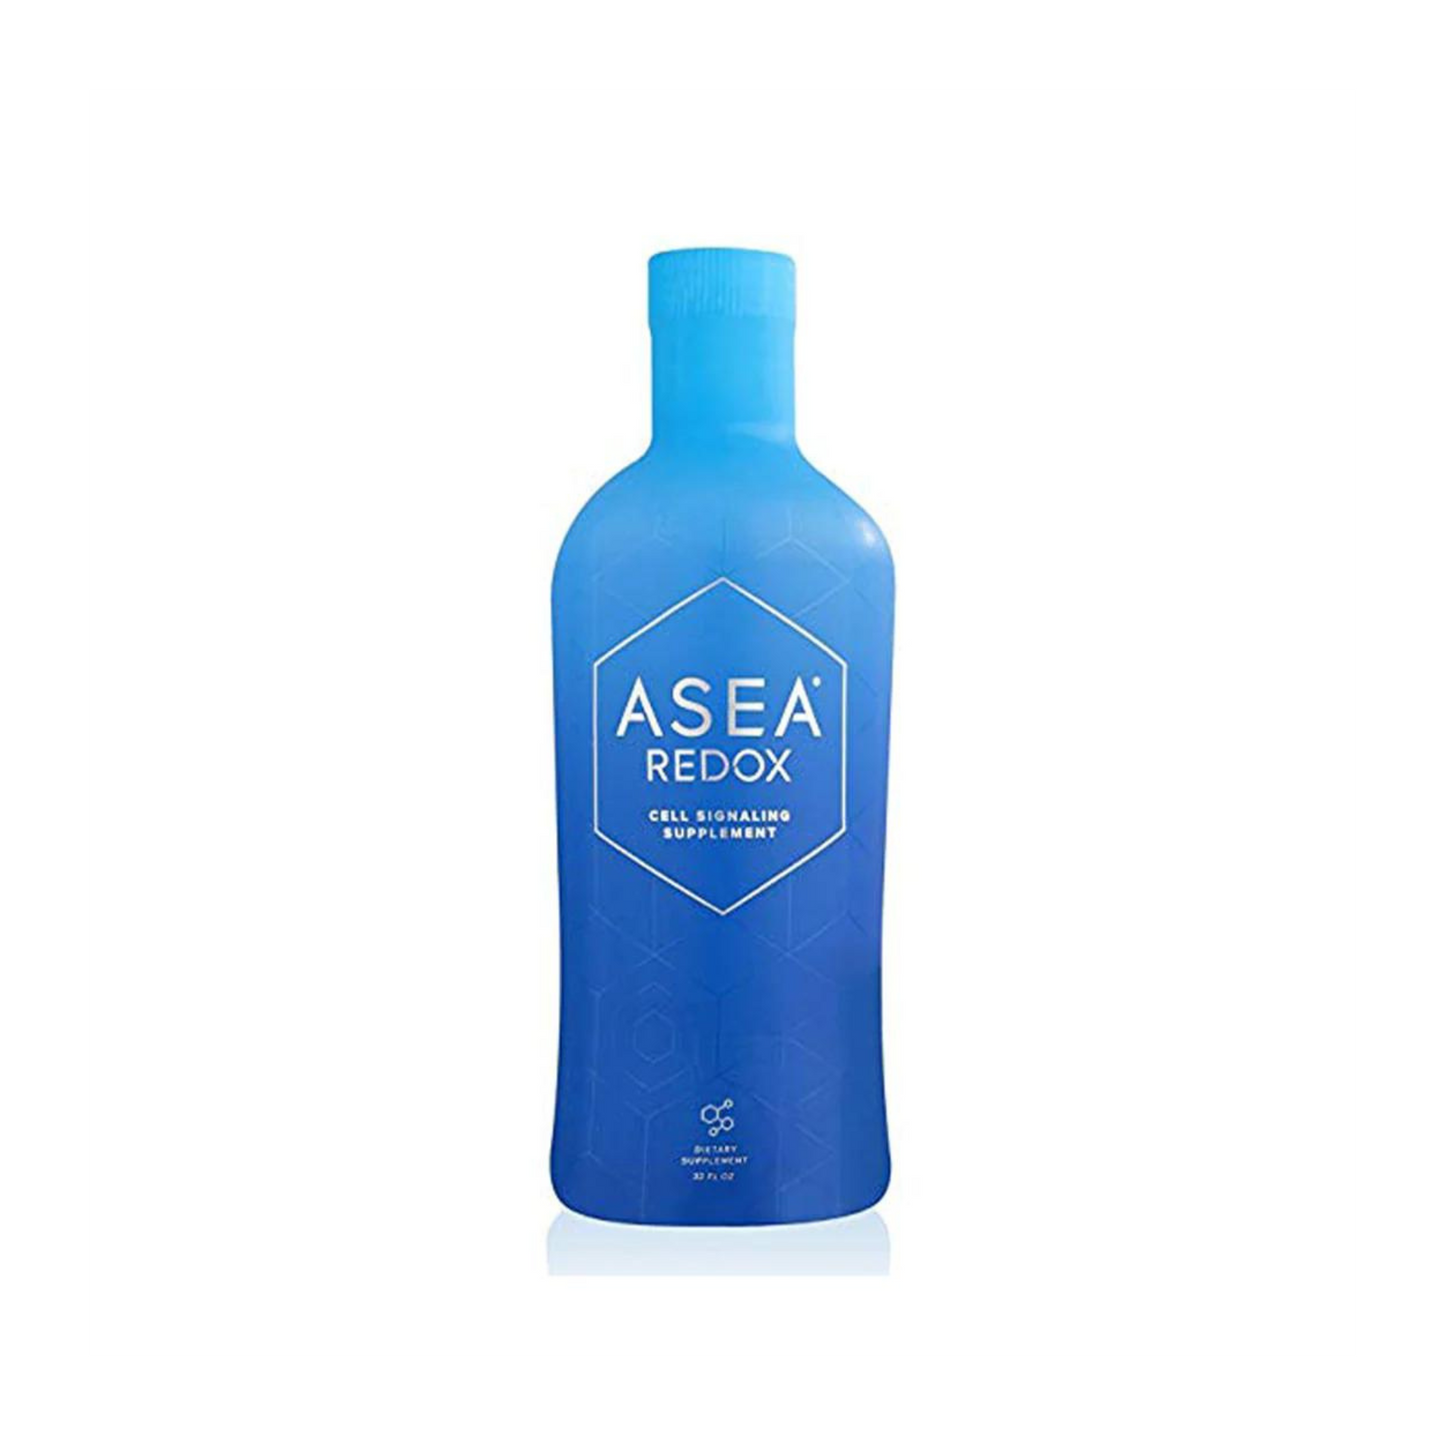 Asea - Redox Cell Signaling Supplement